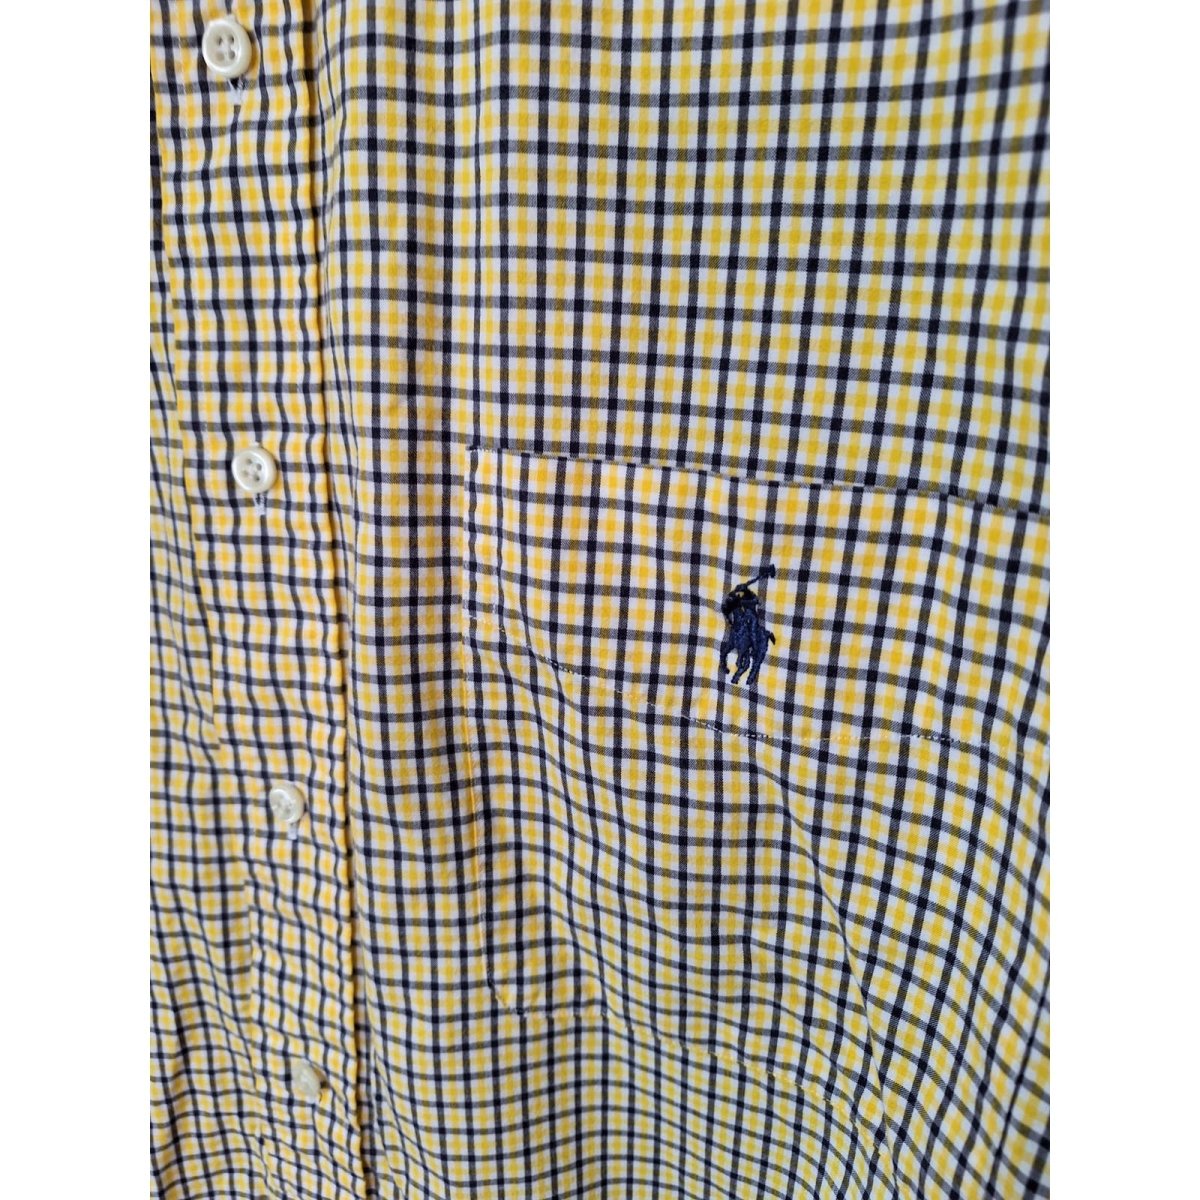 90s/Y2K Yellow Plaid Button Down by Ralph Lauren XL - themallvintage The Mall Vintage